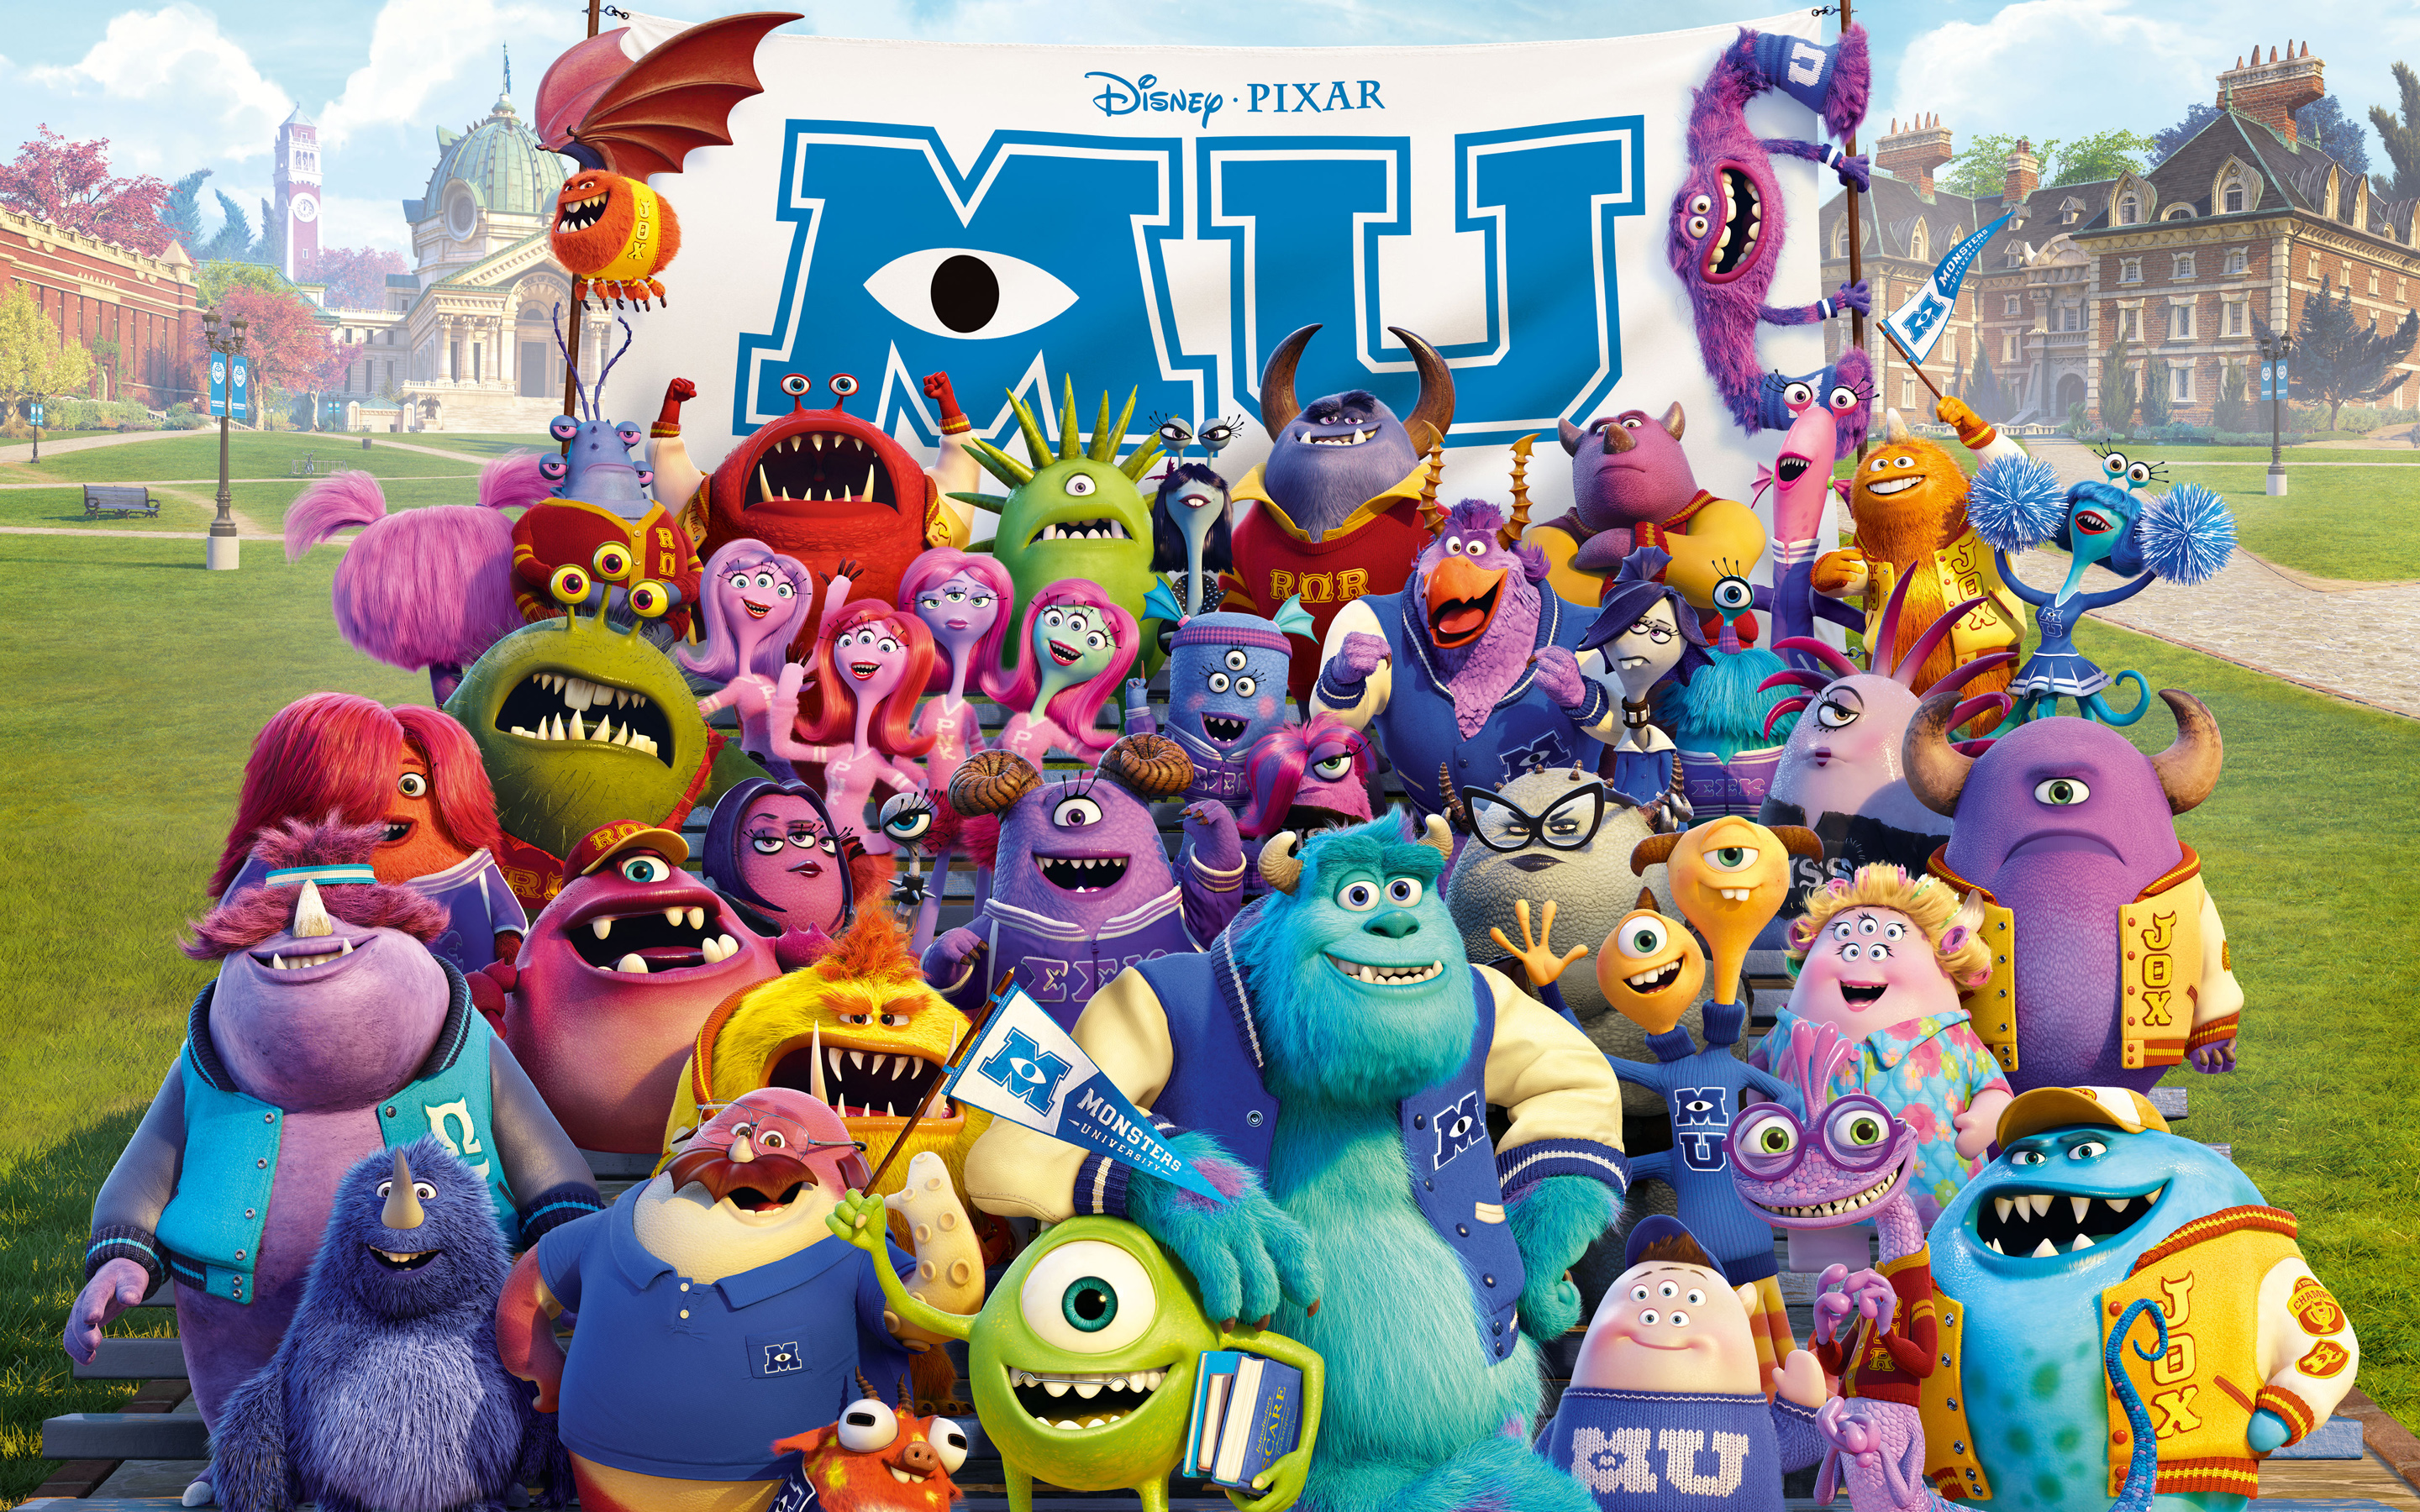 Box Office Report: Monsters U. stays at No. 1; The Heat has solid debut